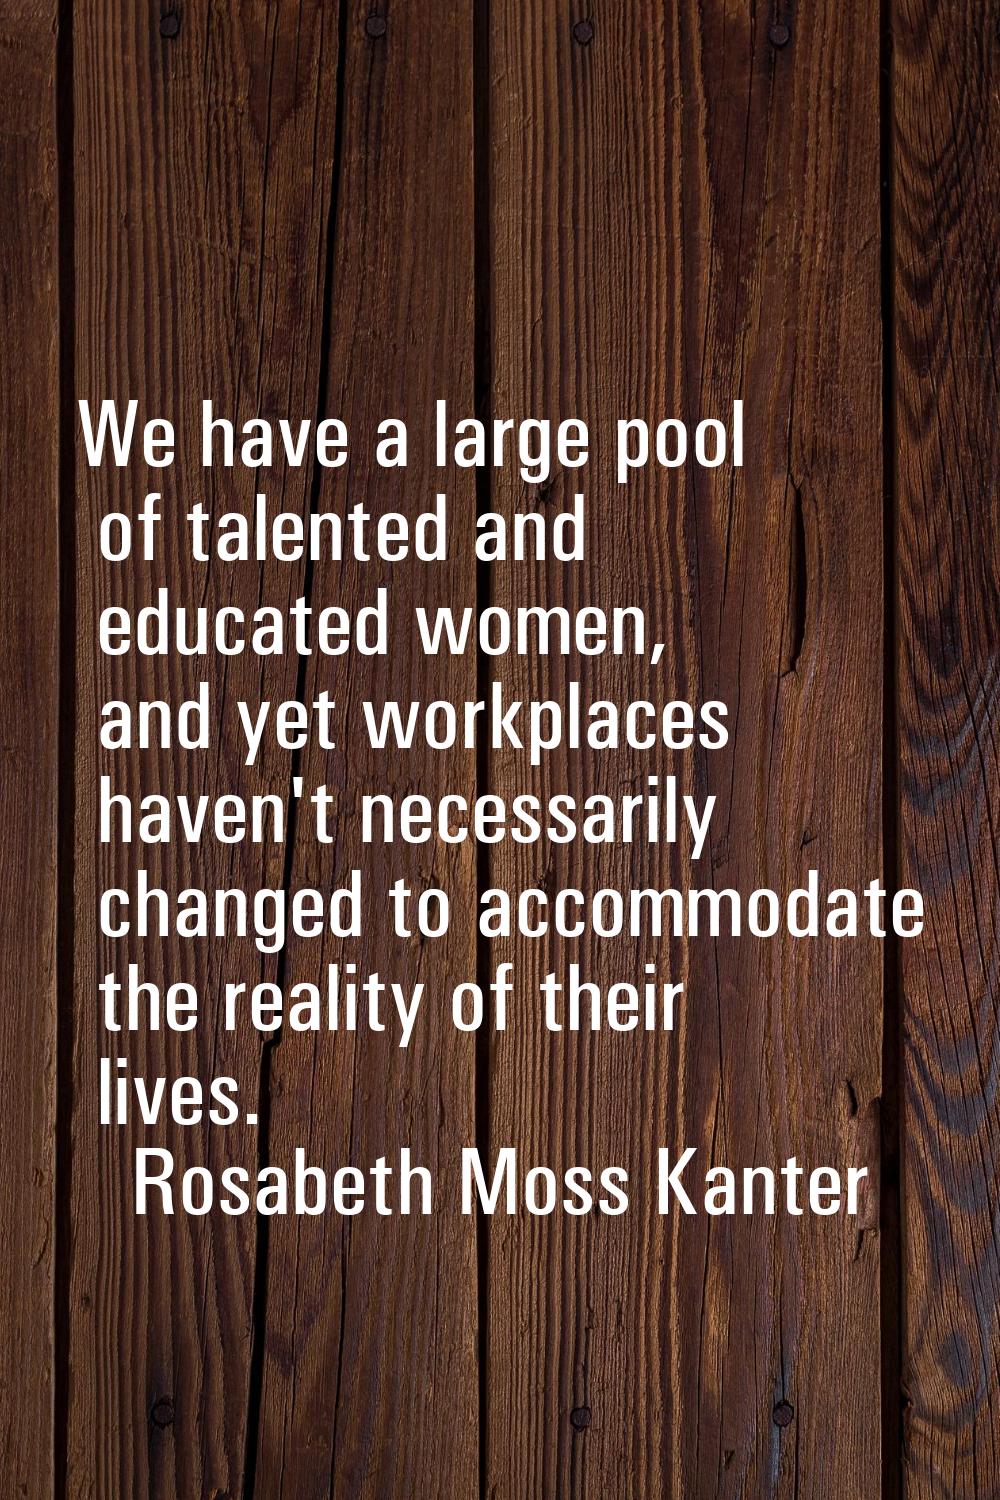 We have a large pool of talented and educated women, and yet workplaces haven't necessarily changed